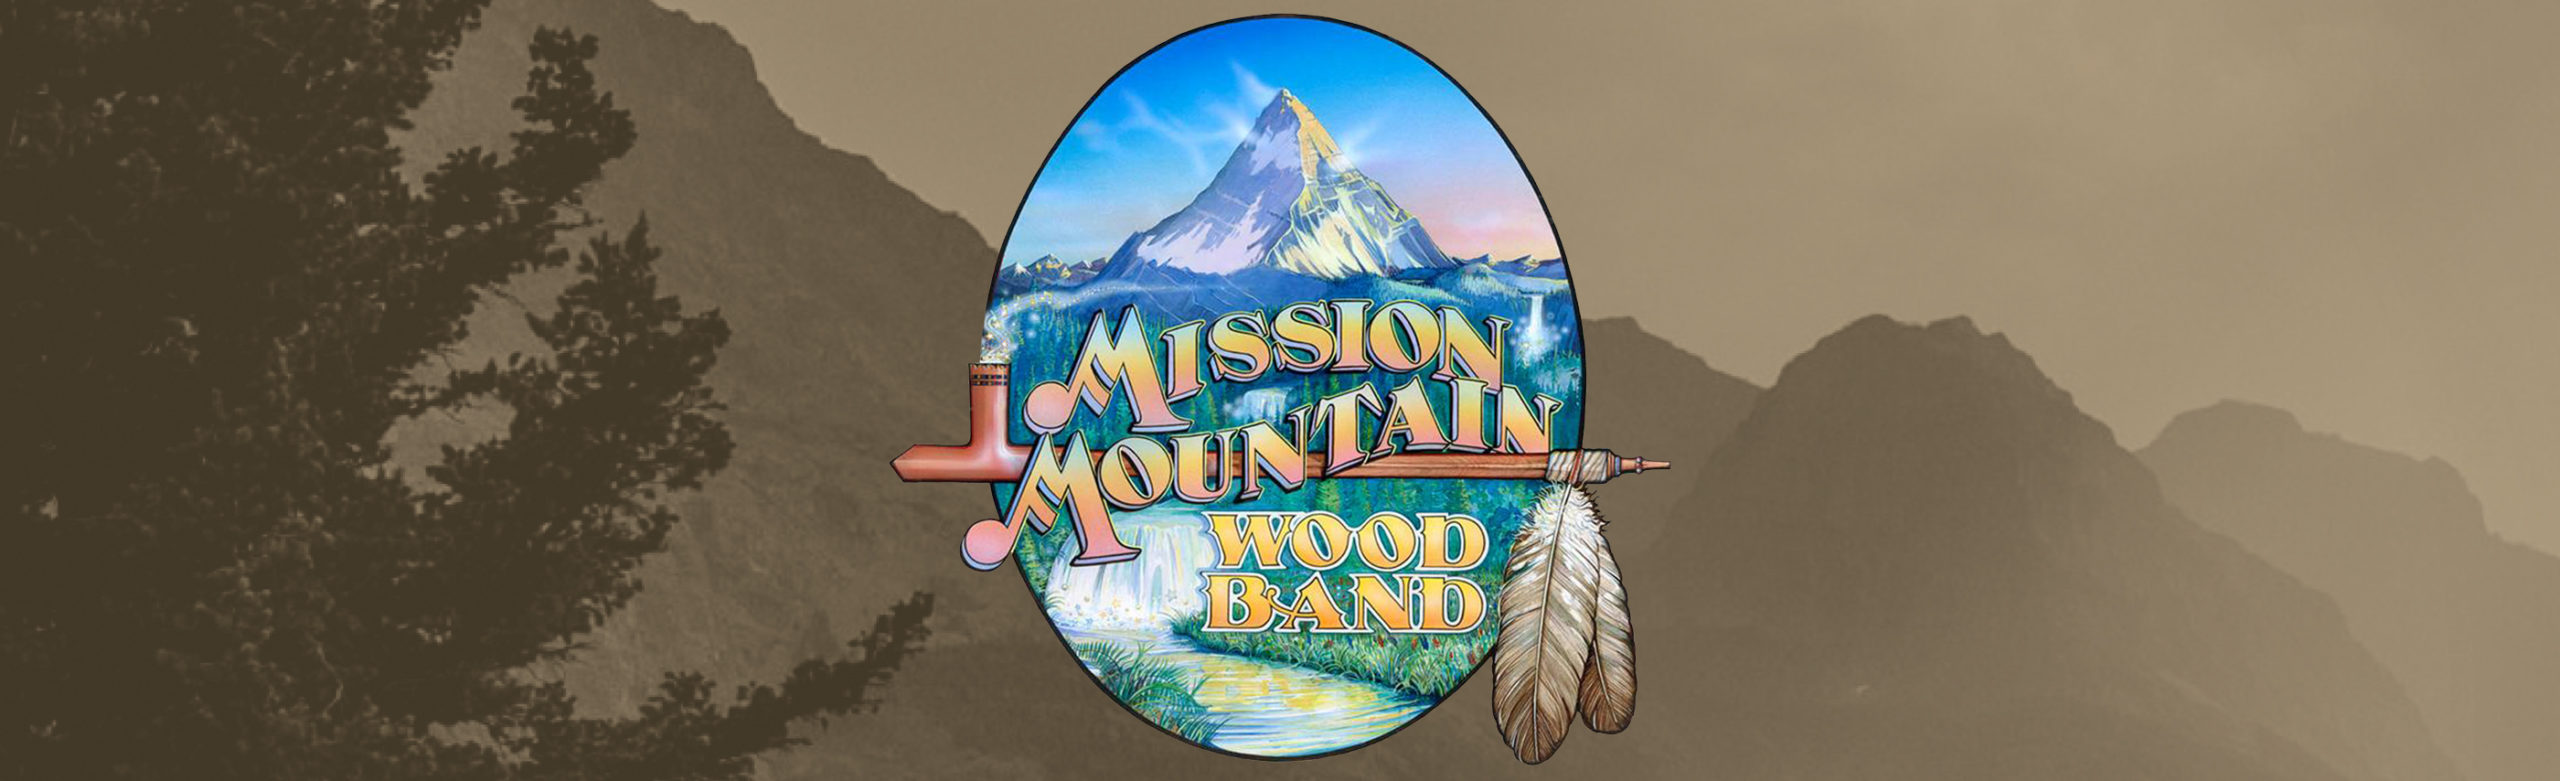 VIP Reception – Mission Mountain Wood Band